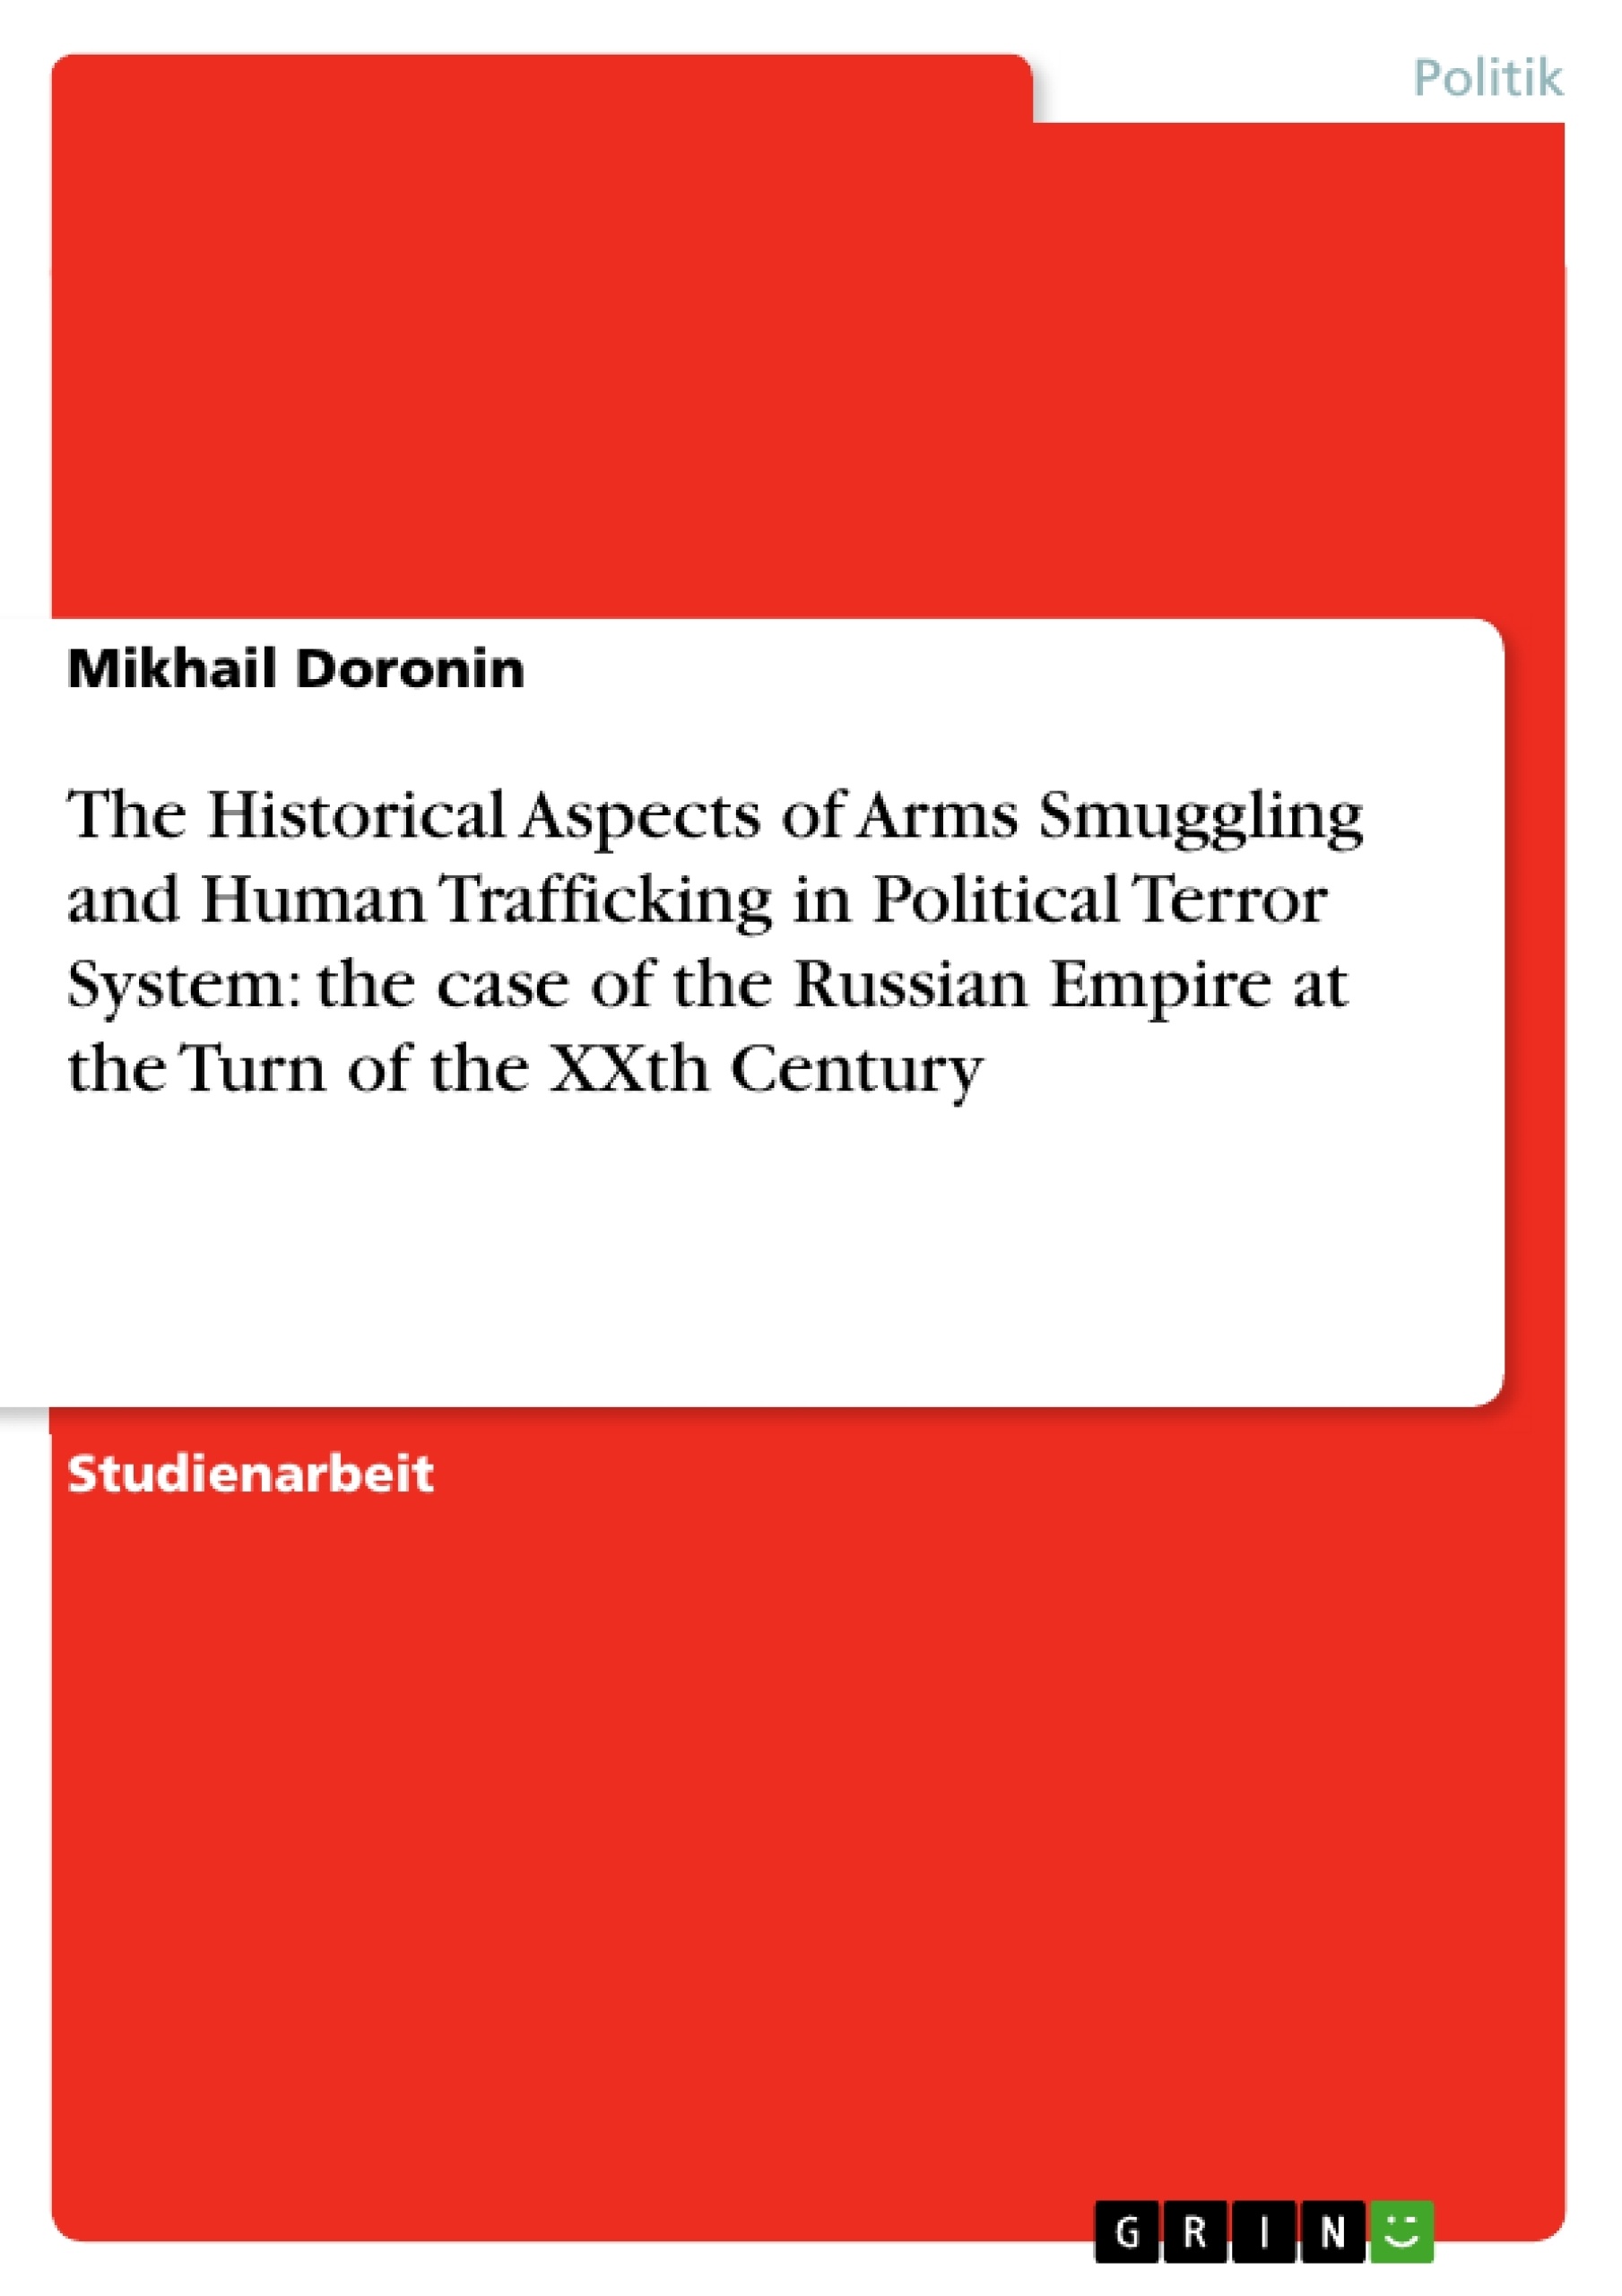 Titel: The Historical Aspects of Arms Smuggling and Human Trafficking in Political Terror System: the case of the Russian Empire at the Turn of the XXth Century 